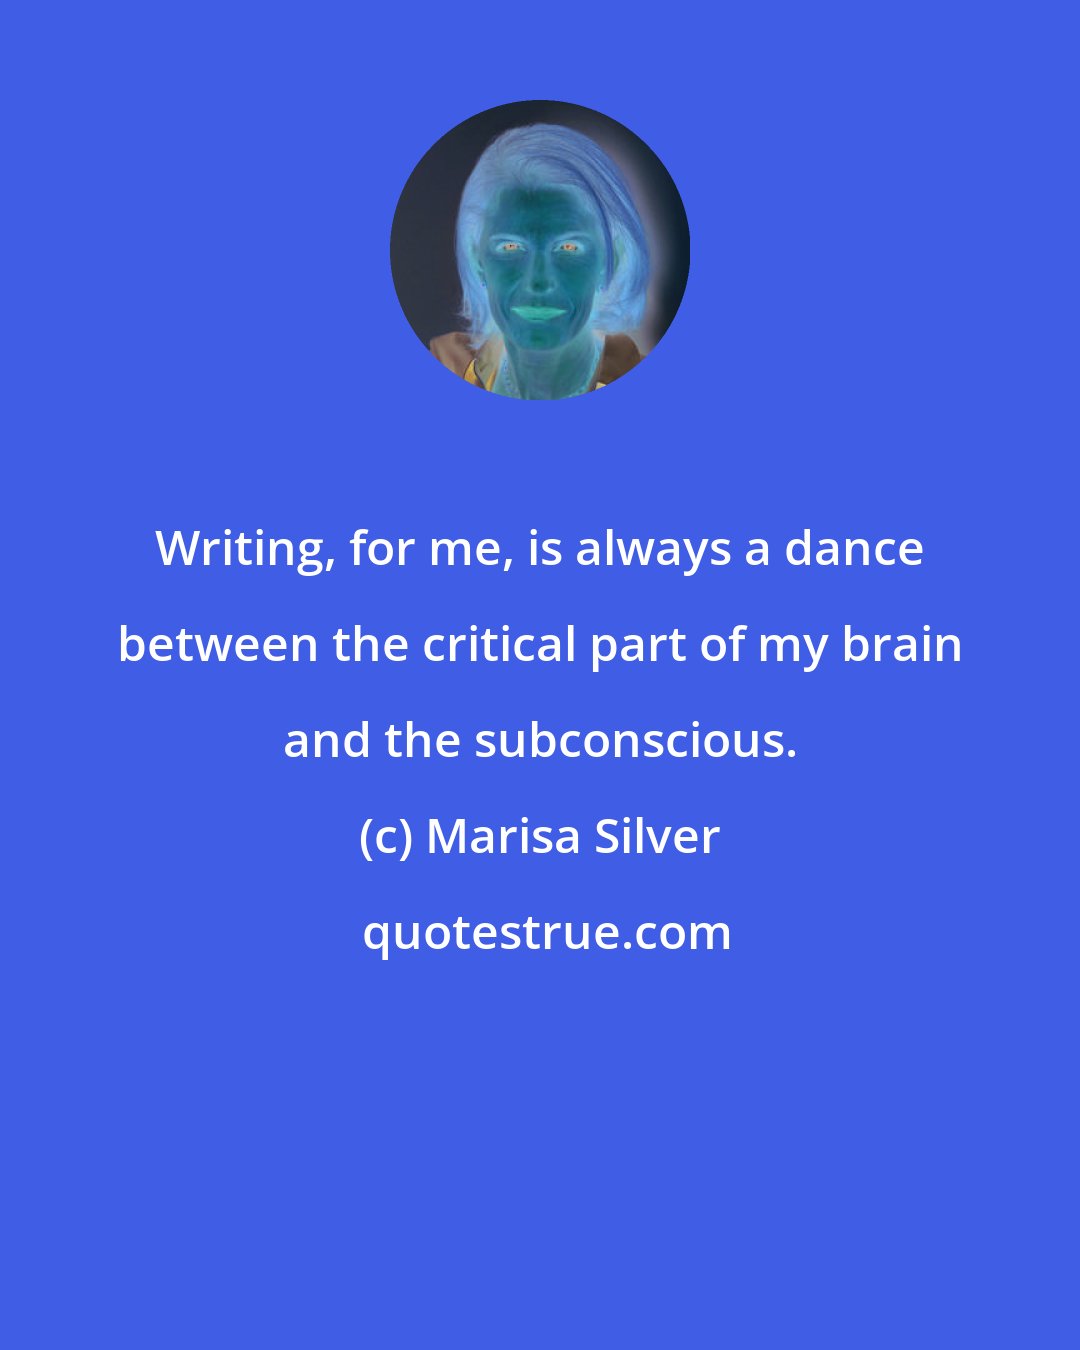 Marisa Silver: Writing, for me, is always a dance between the critical part of my brain and the subconscious.